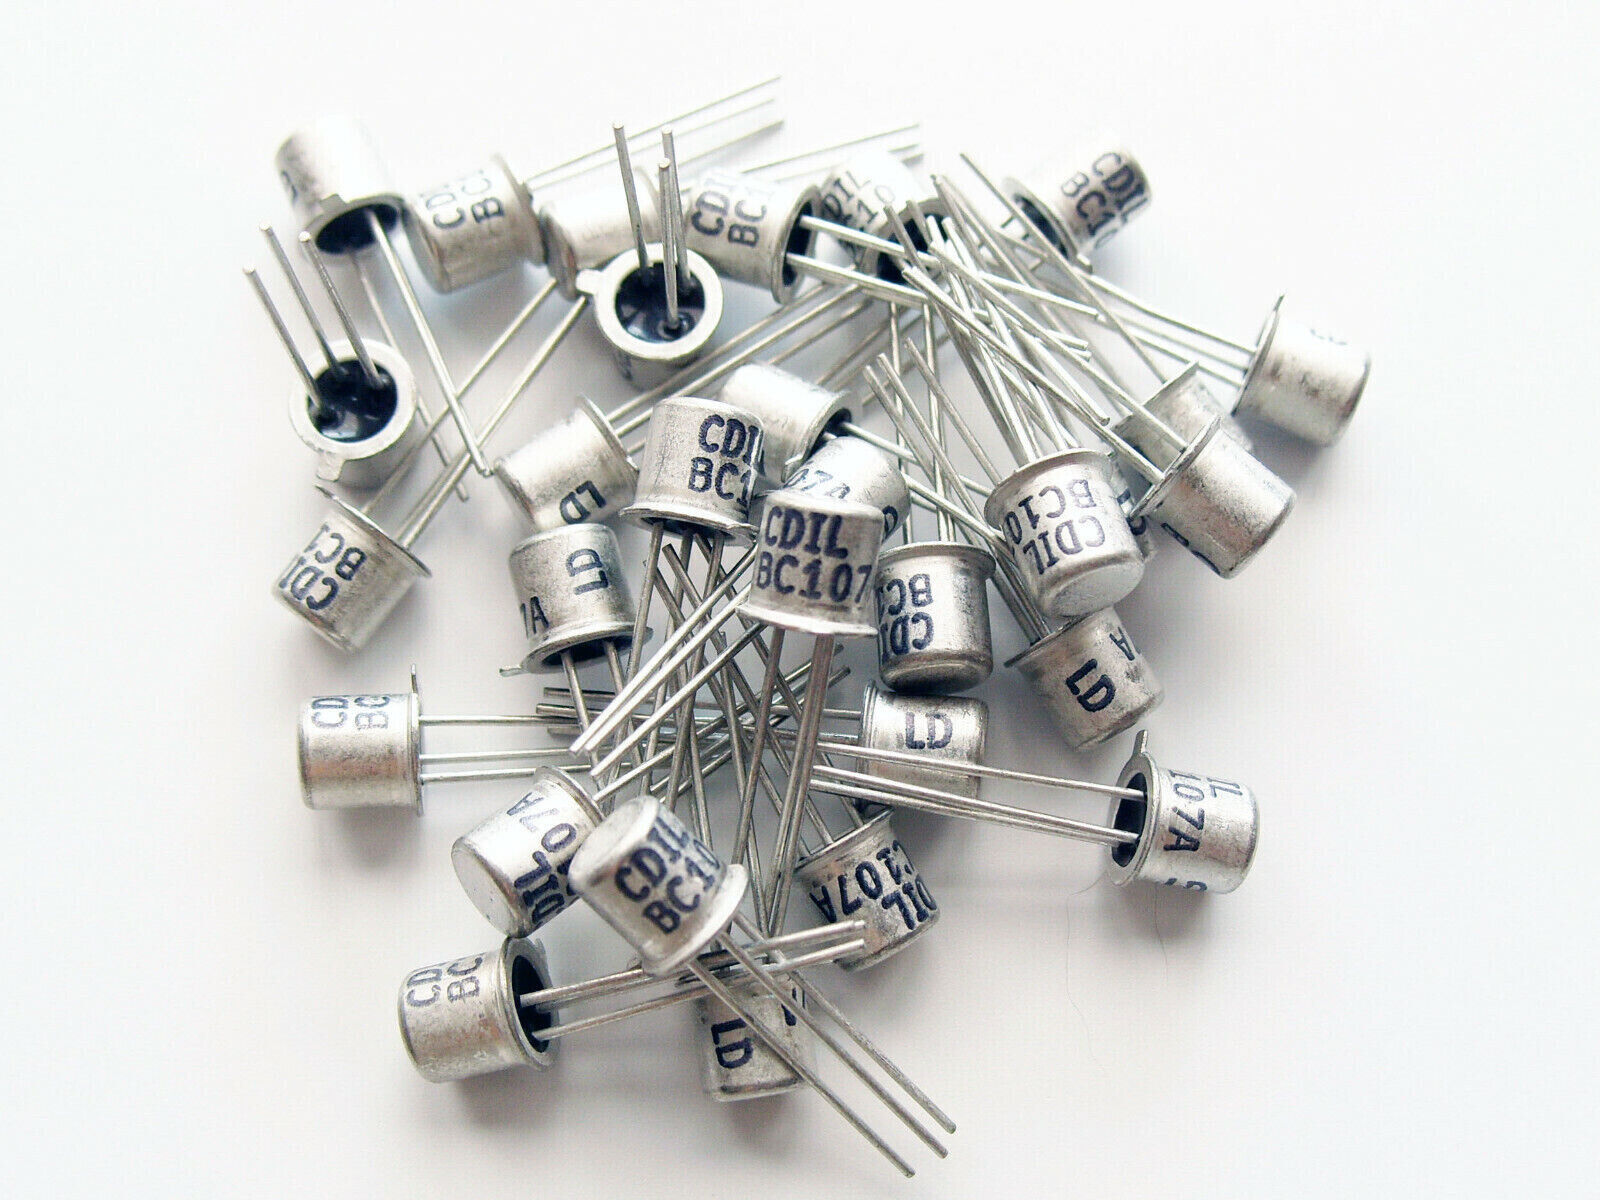 10x BC107A NPN Low Noise Small Signal Transistor TO-18 Metal CAN; CDIL